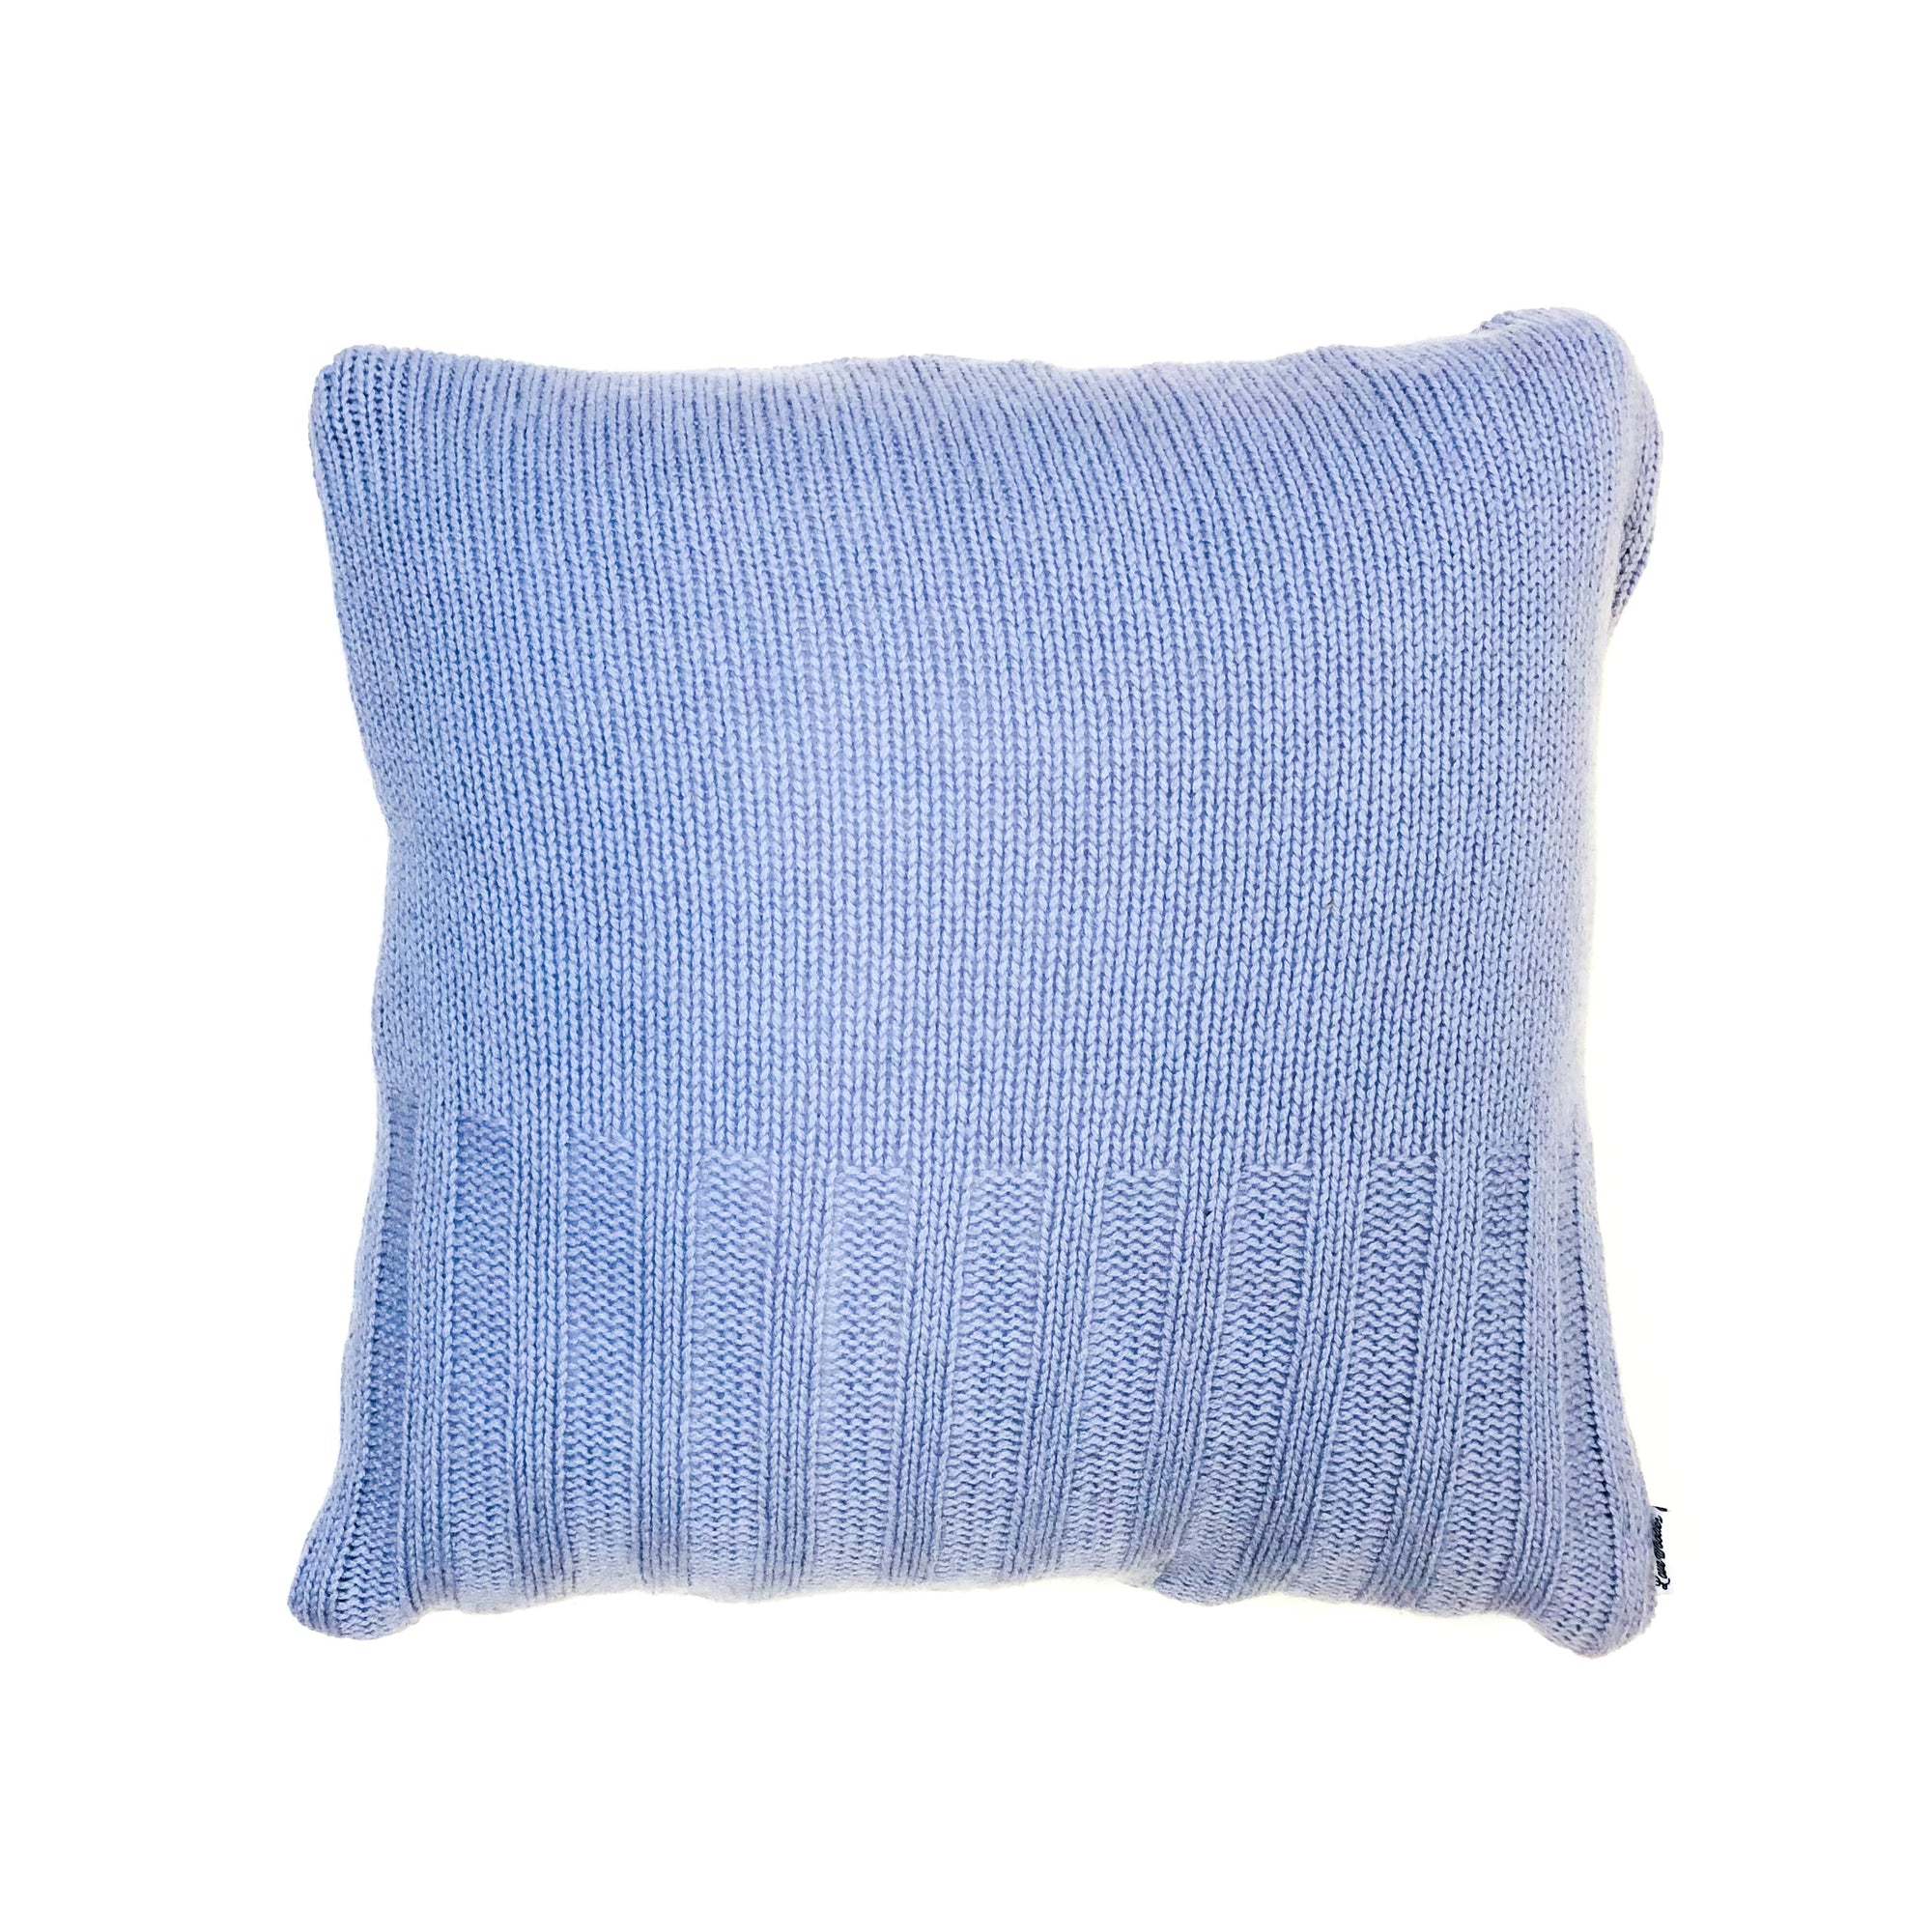 14 x 14 Periwinkle Blue Pillow Cover - Love Woolies